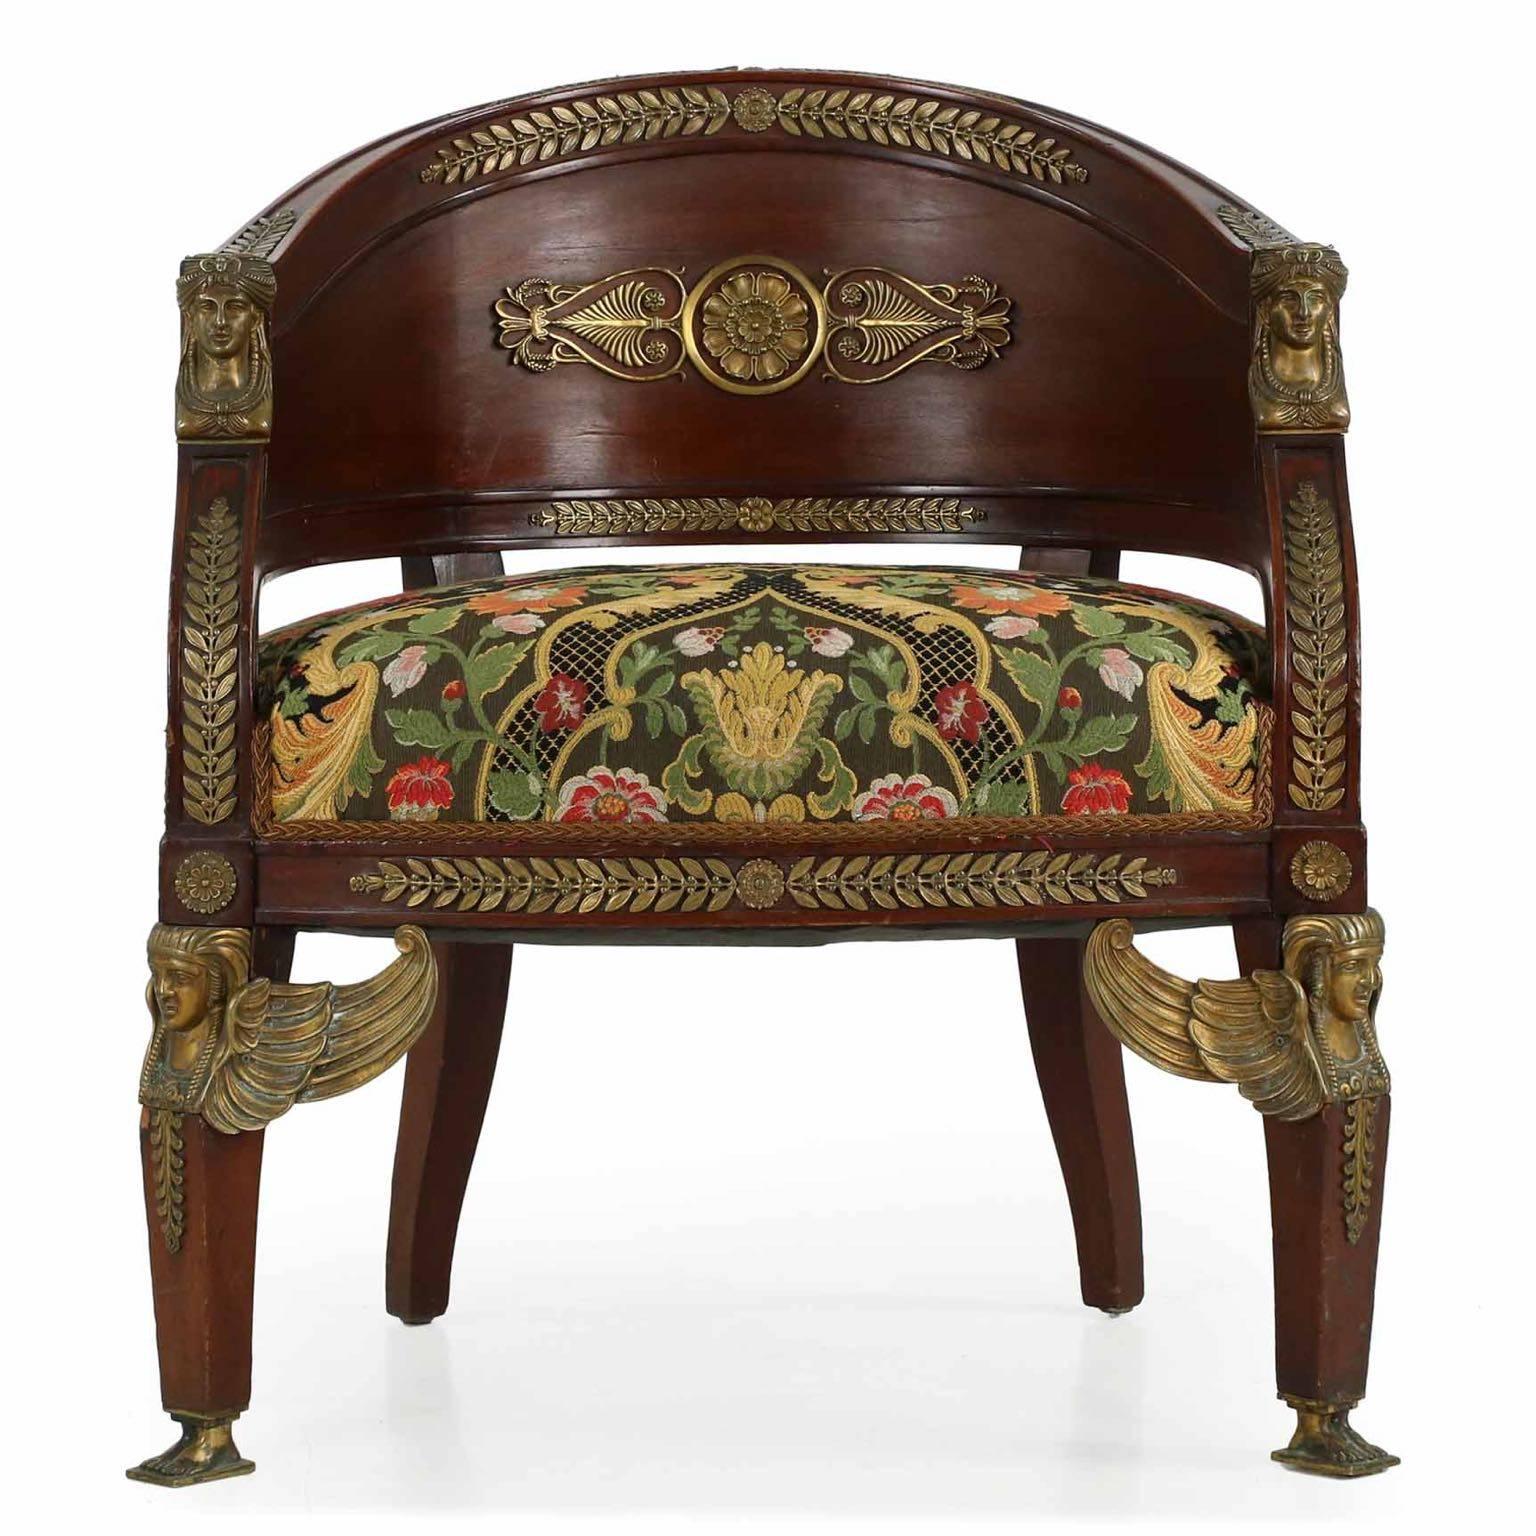 Of unusually interesting stance and form, this Egyptian Revival chair was crafted during or just after the reign of Napoleon III during the third quarter of the 19th century. Strength and boldness are projected in the unending stream of beautifully